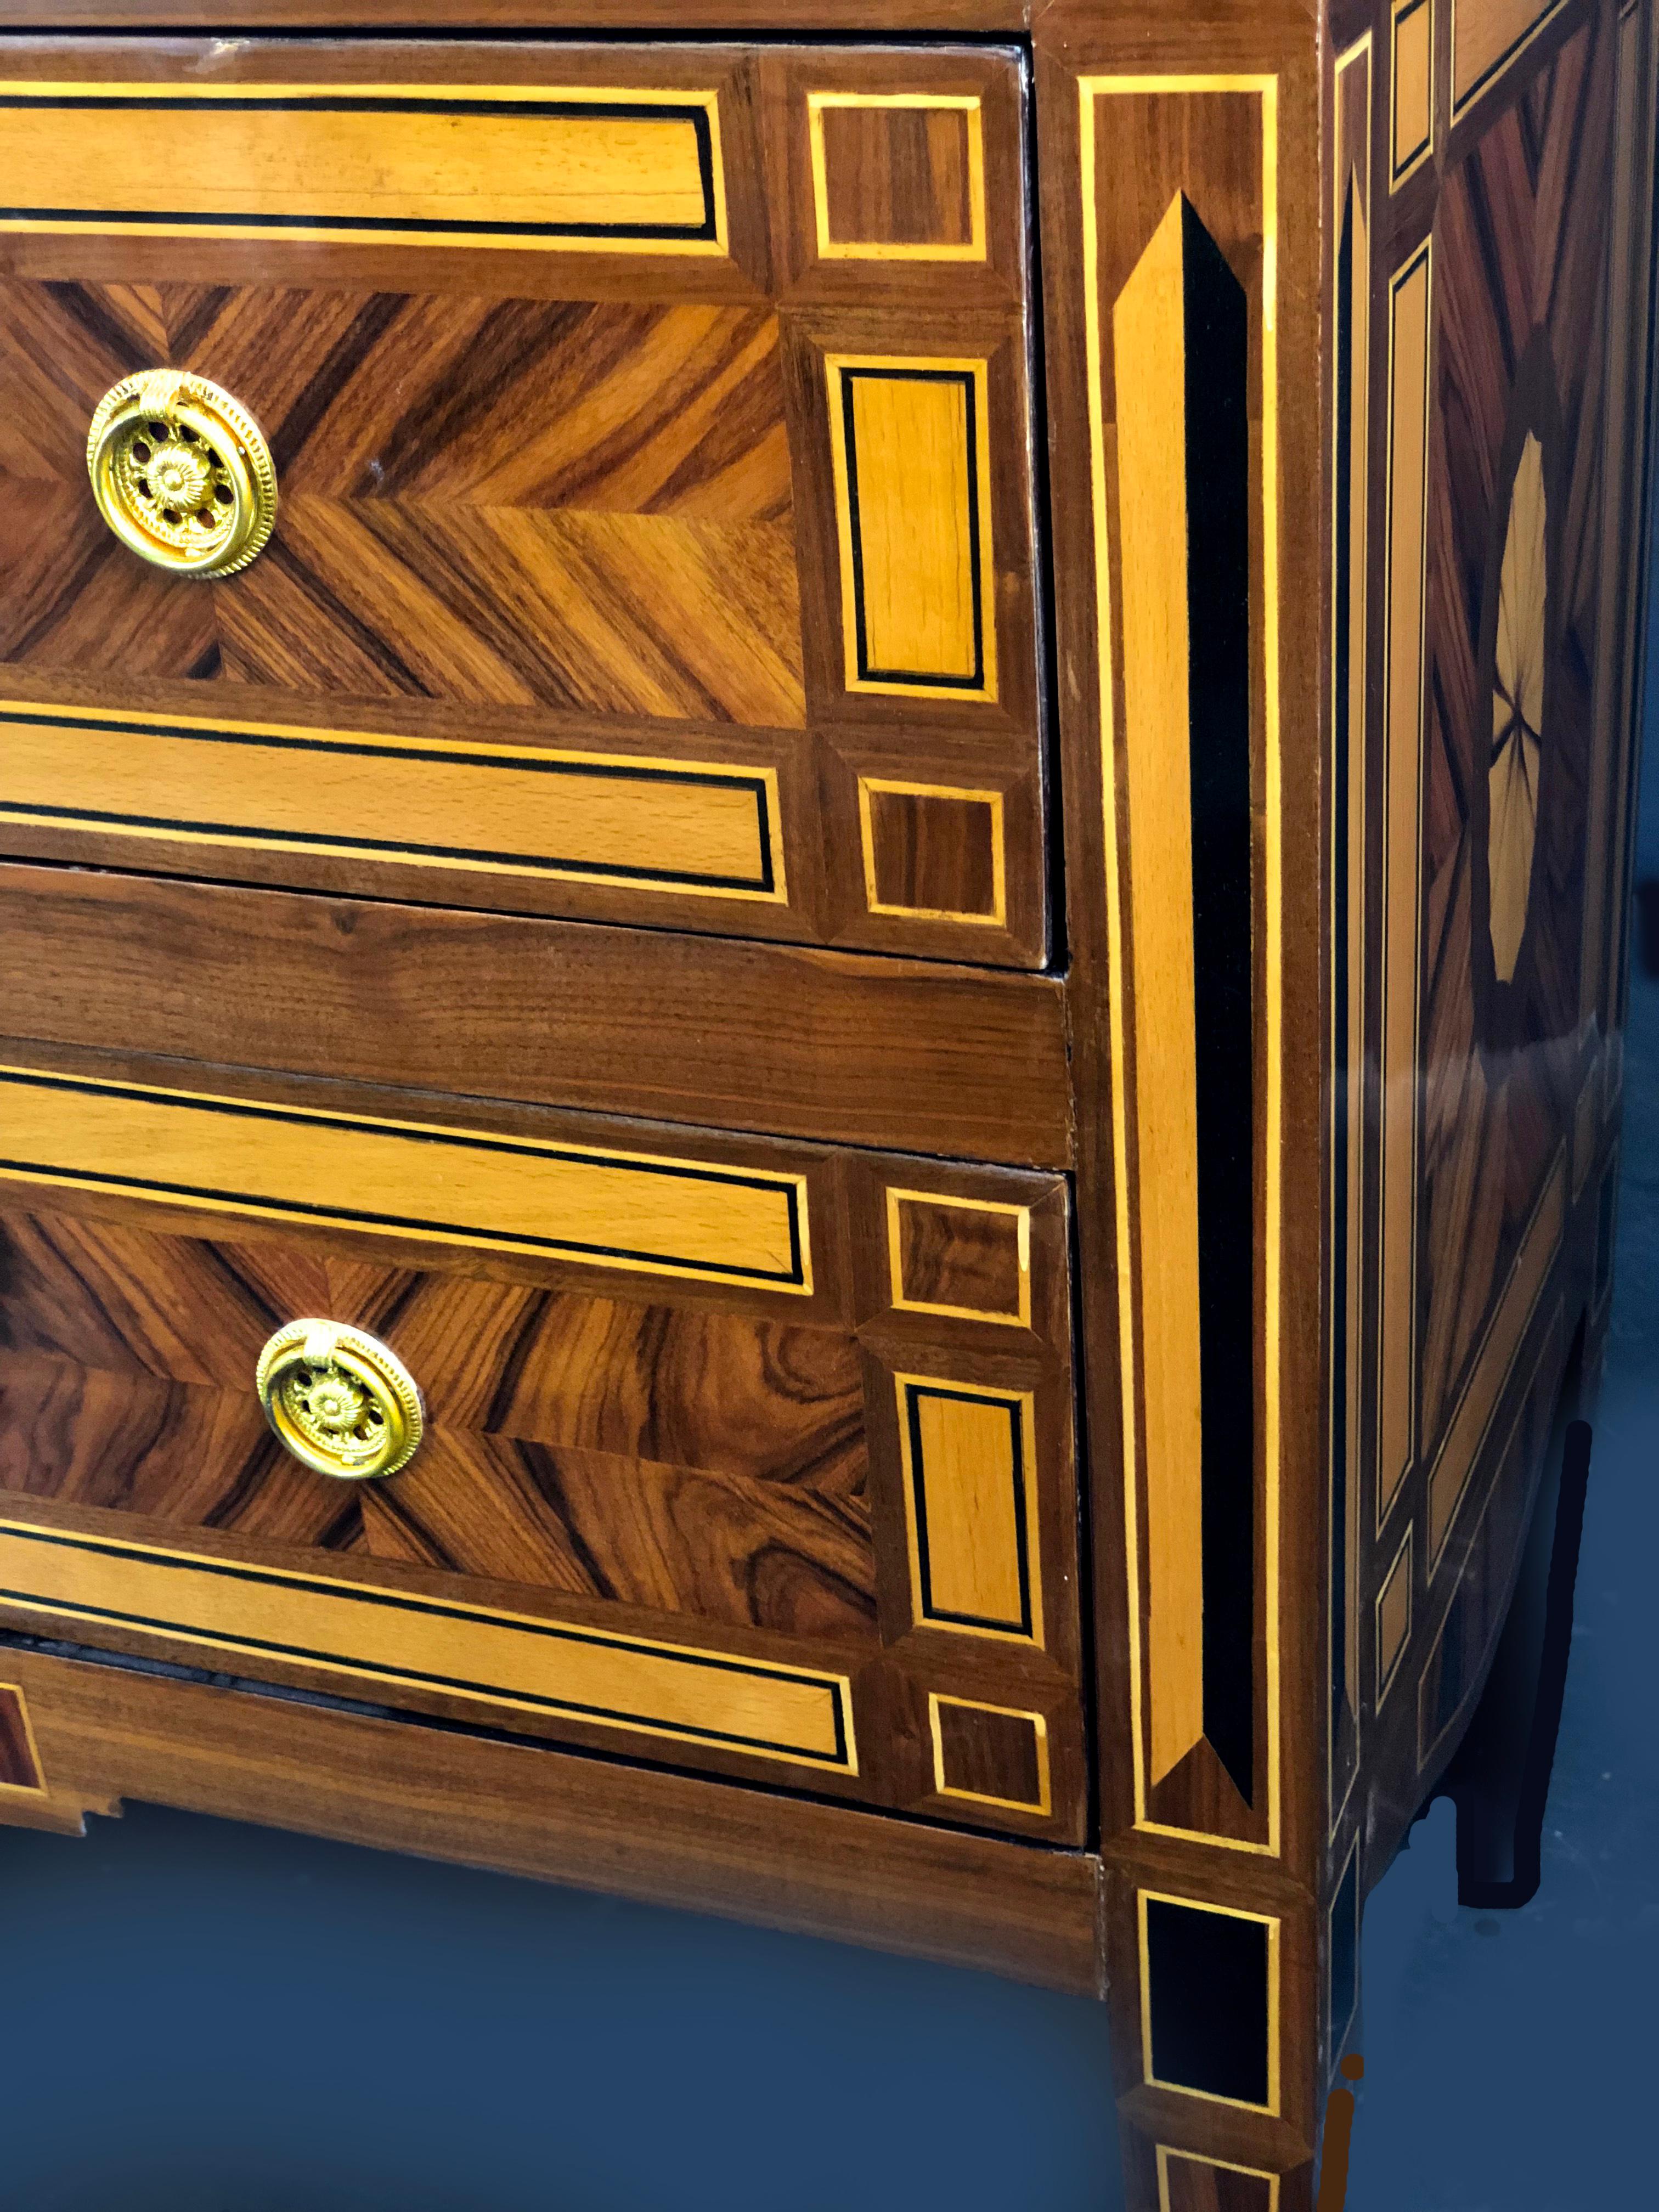 2-Drawer Hall Commode with Outstanding Parquetry (20. Jahrhundert)